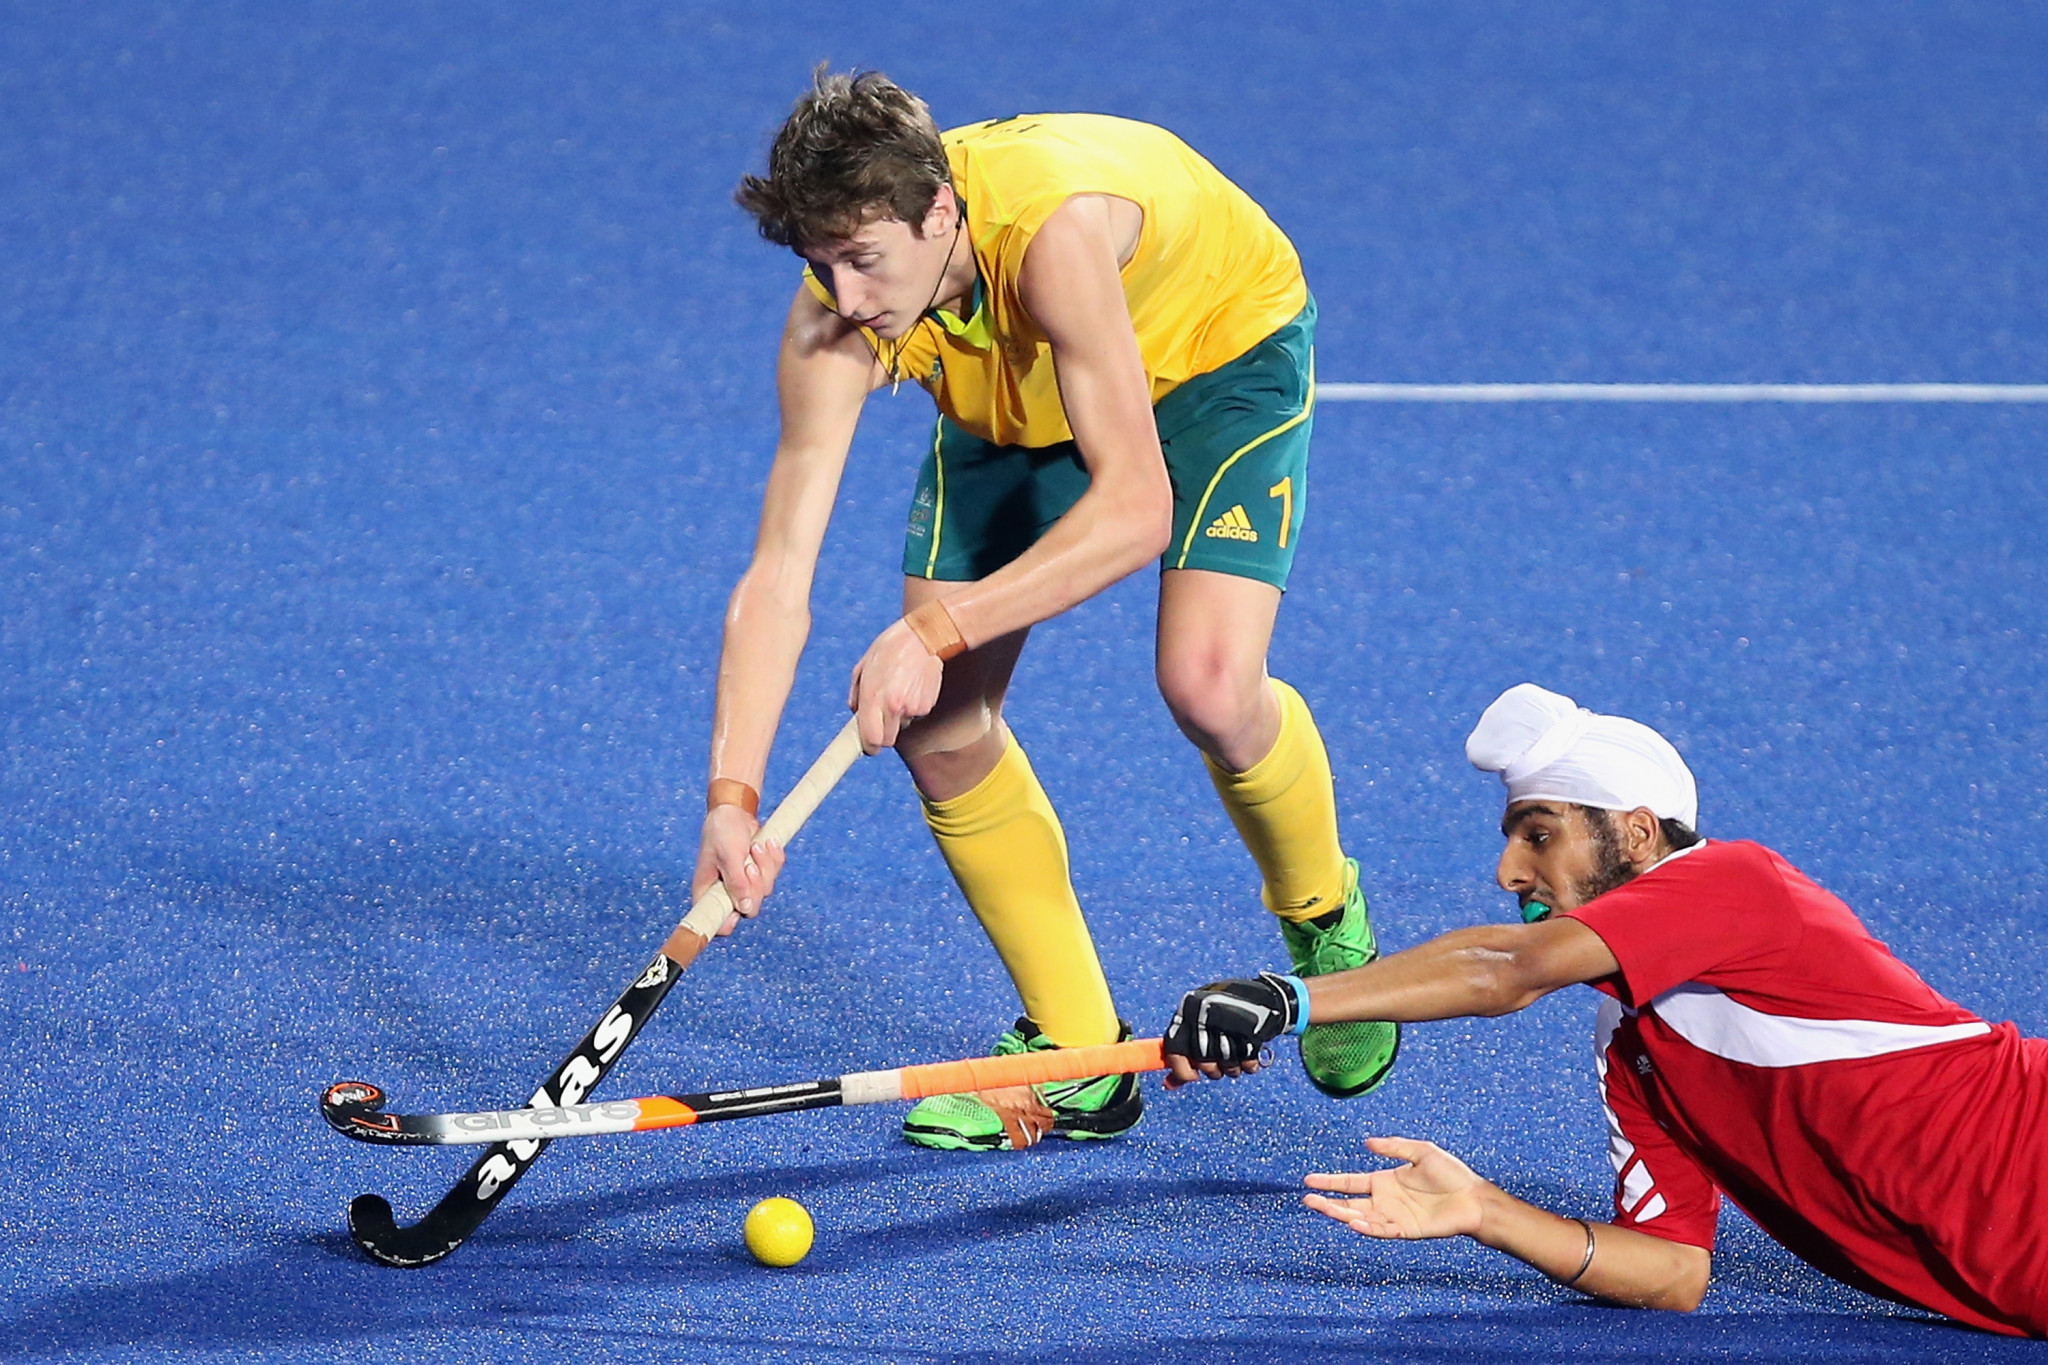 Hockey5s is played with five players per team and has been played at the Youth Olympics ©Getty Images 